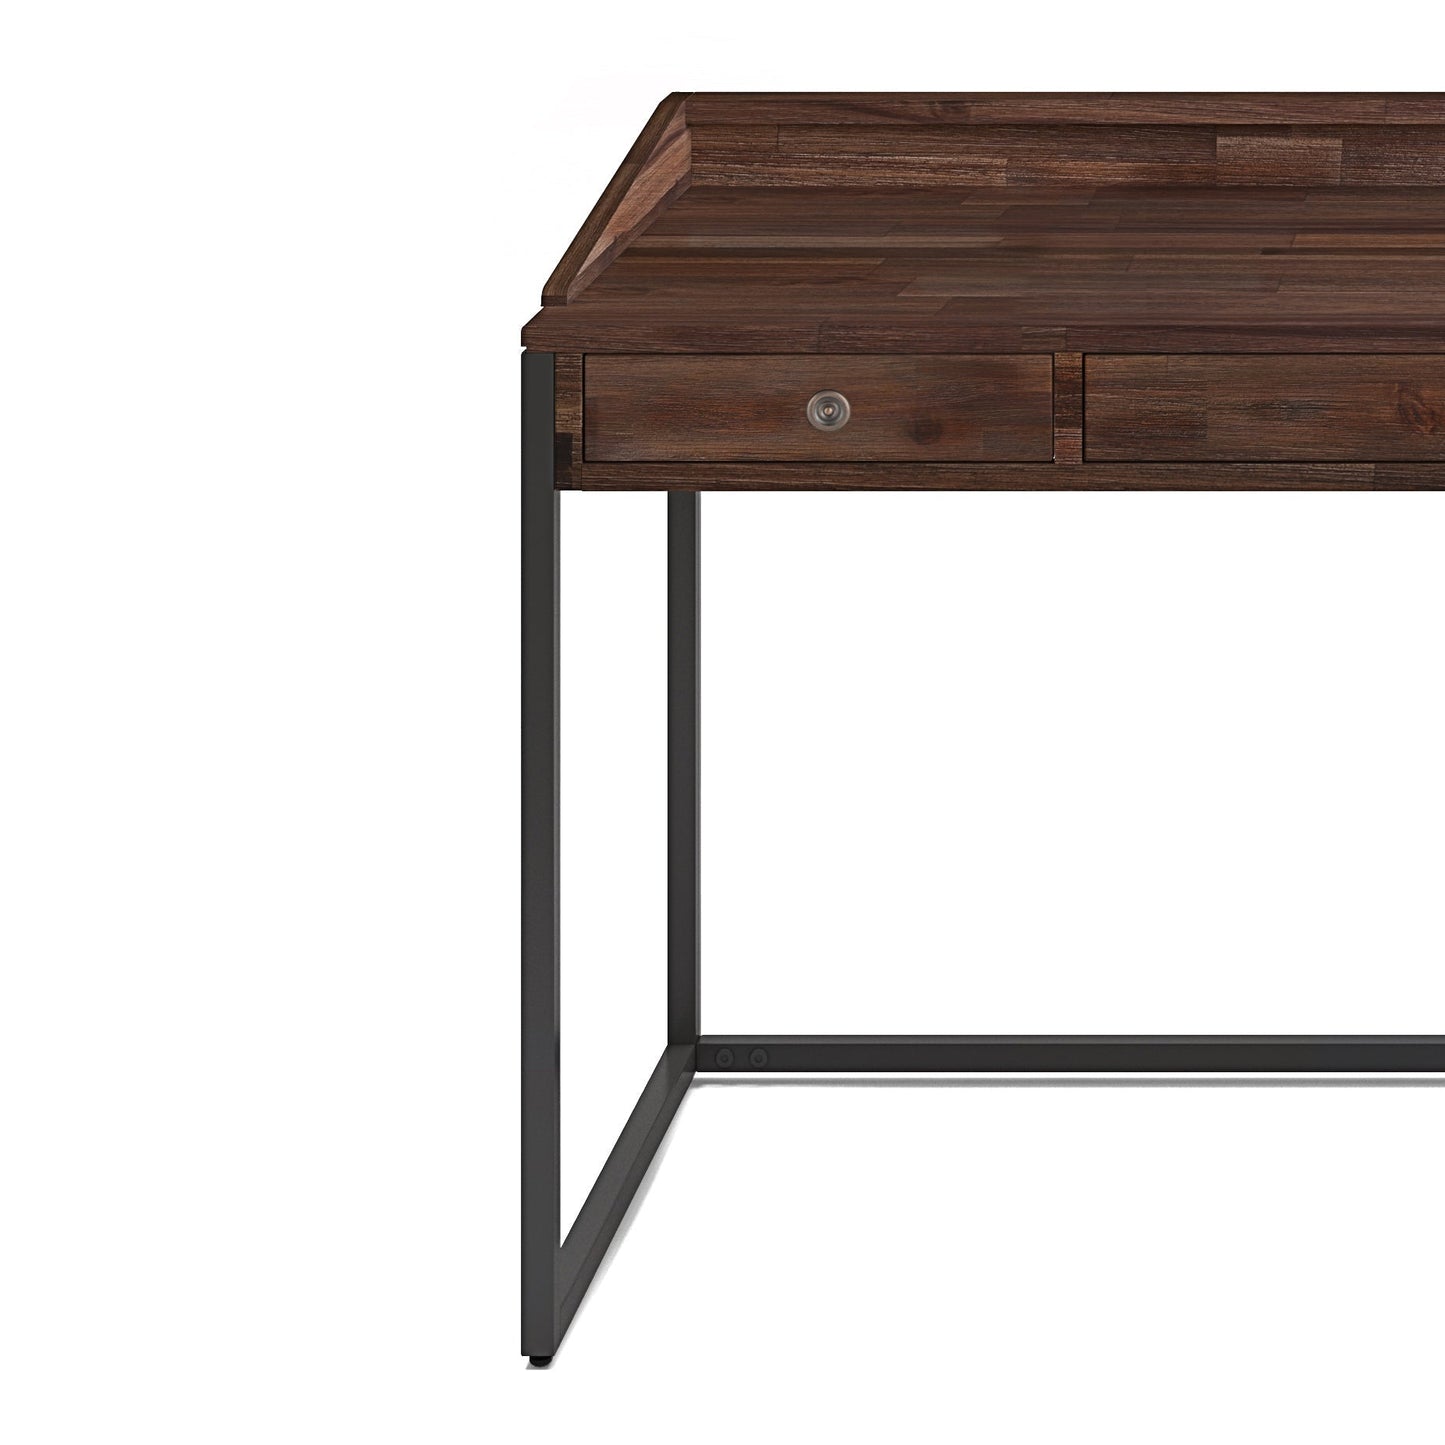 Ralston - Desk - Distressed Charcoal Brown